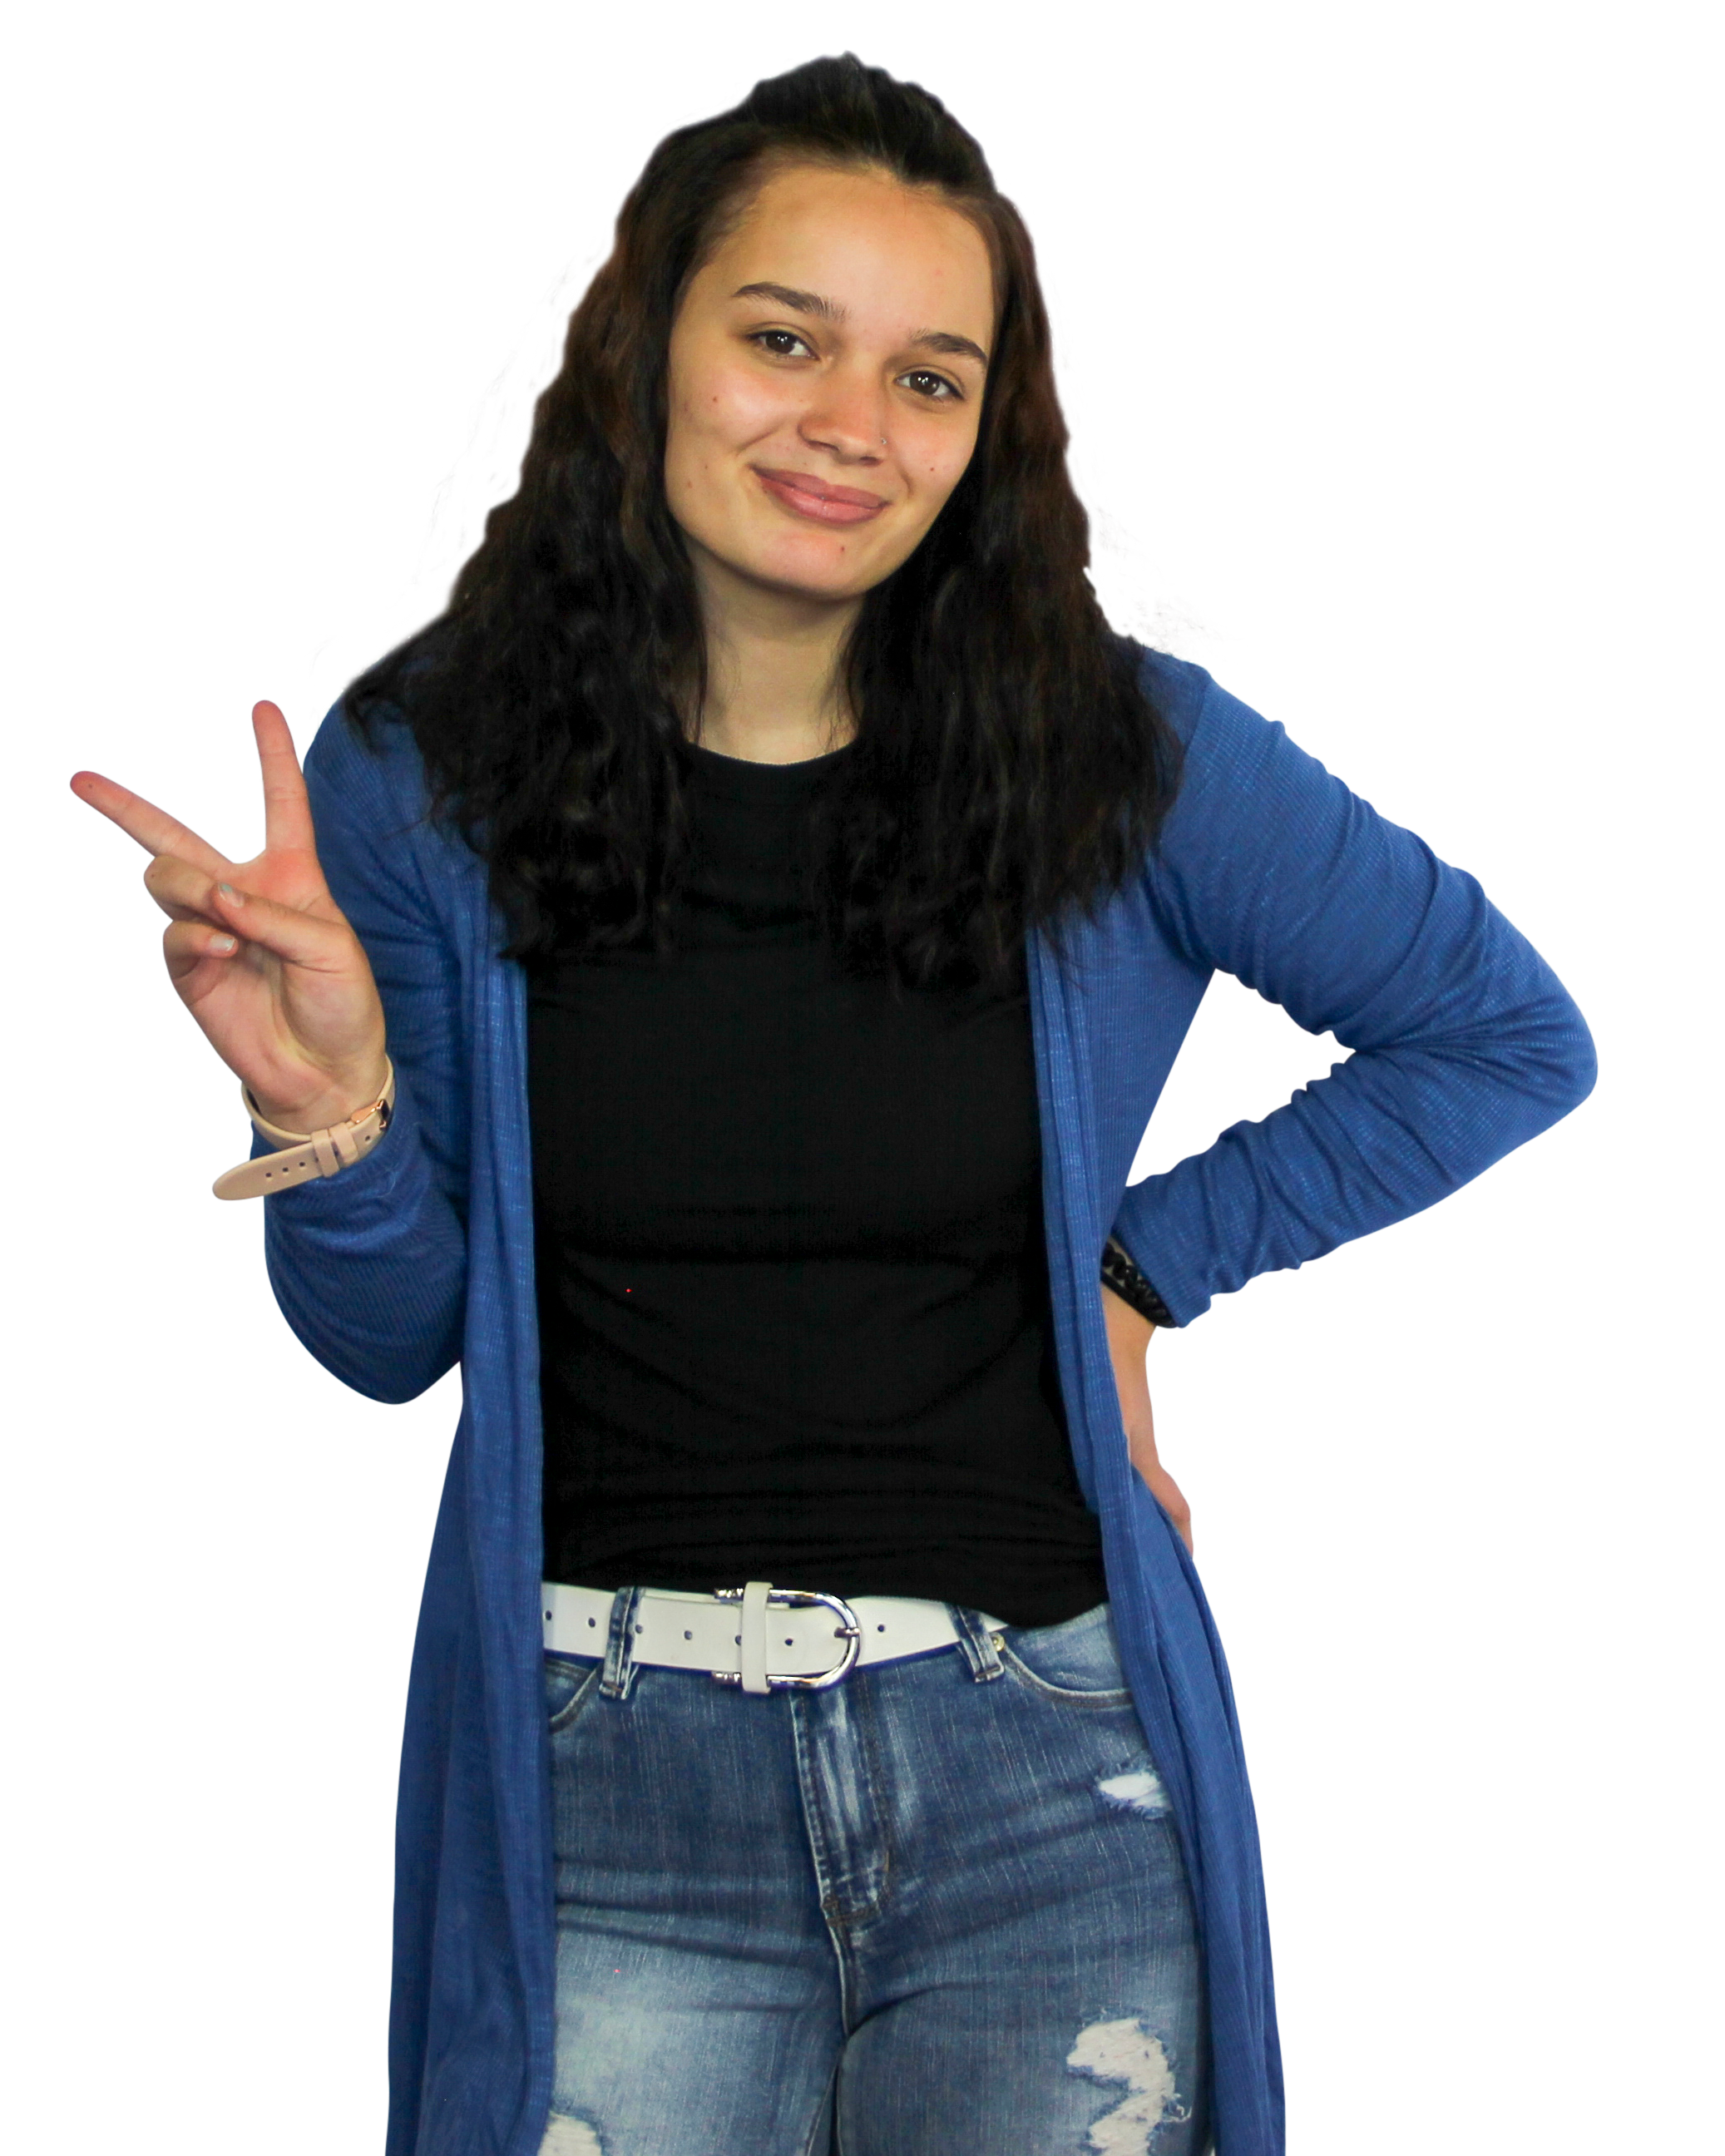 Student with Peace Sign